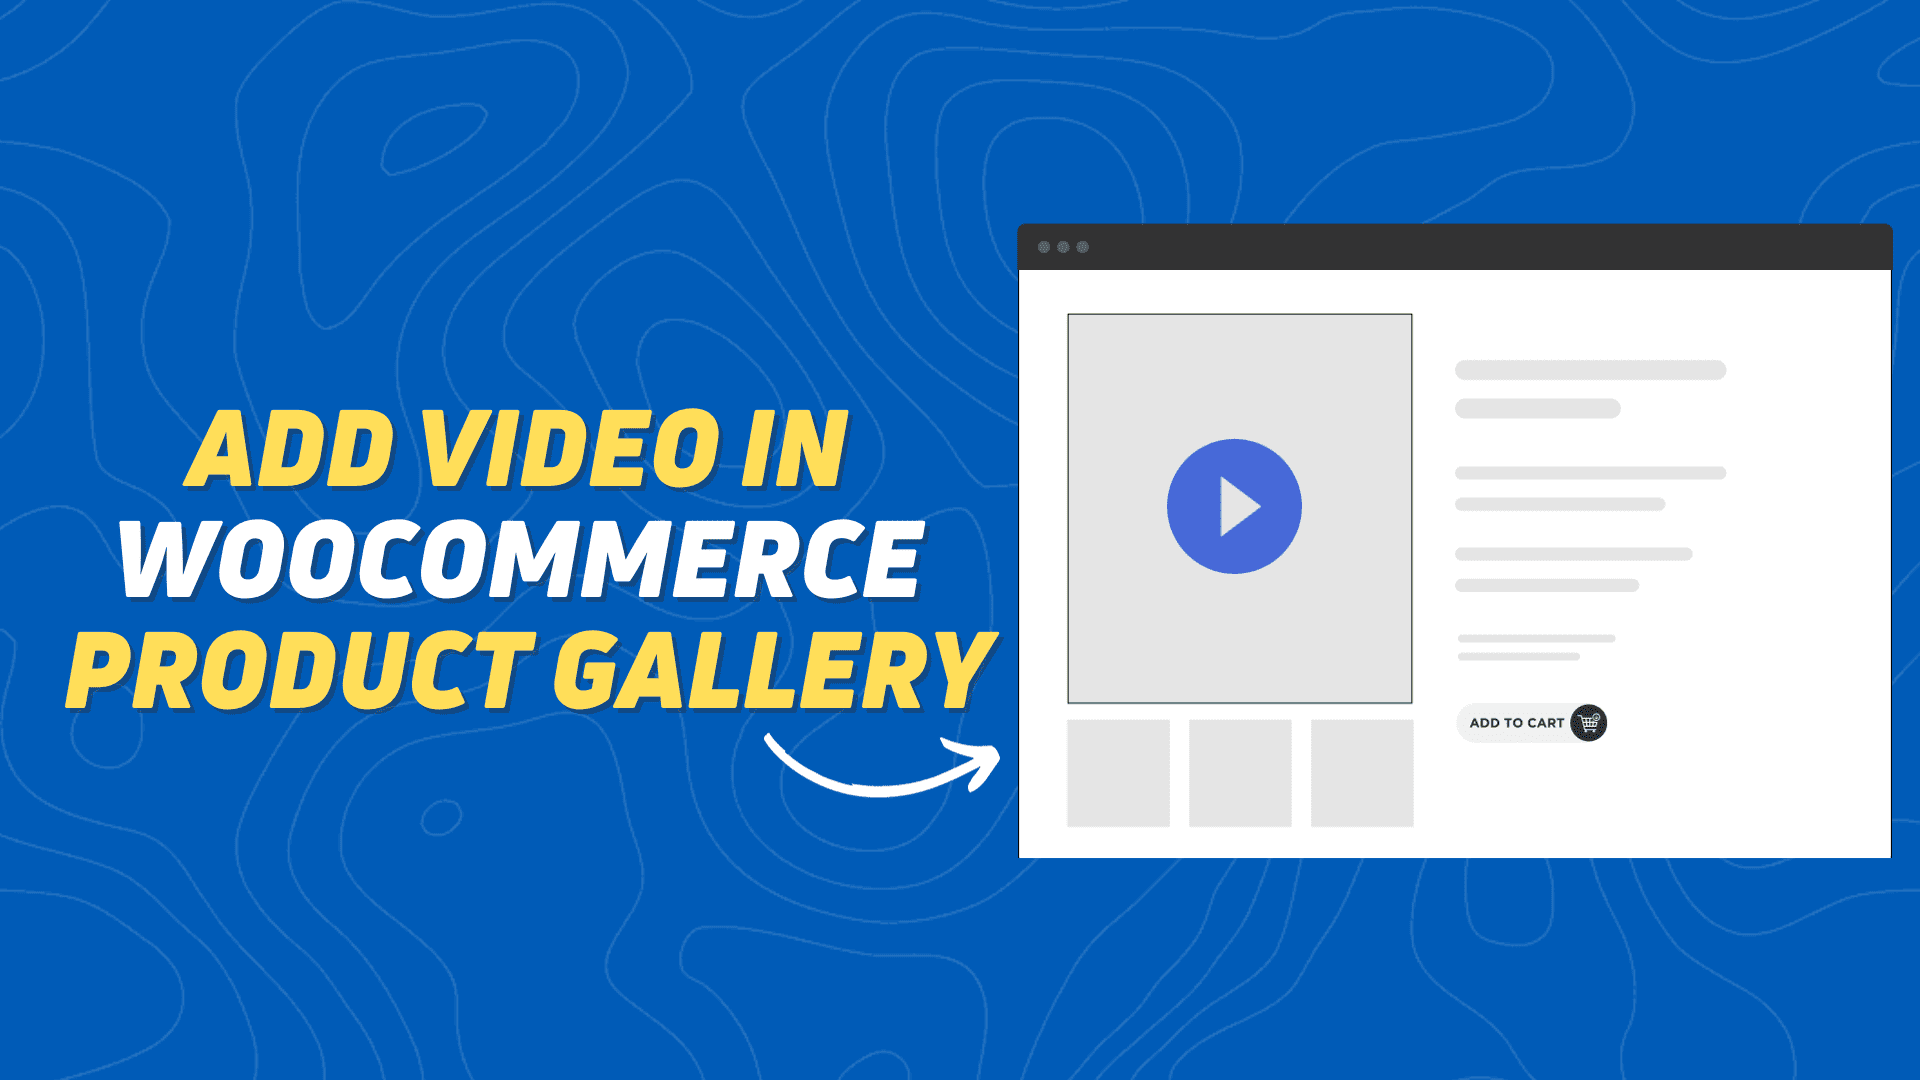 How to Add Video in Woocommerce Product Gallery